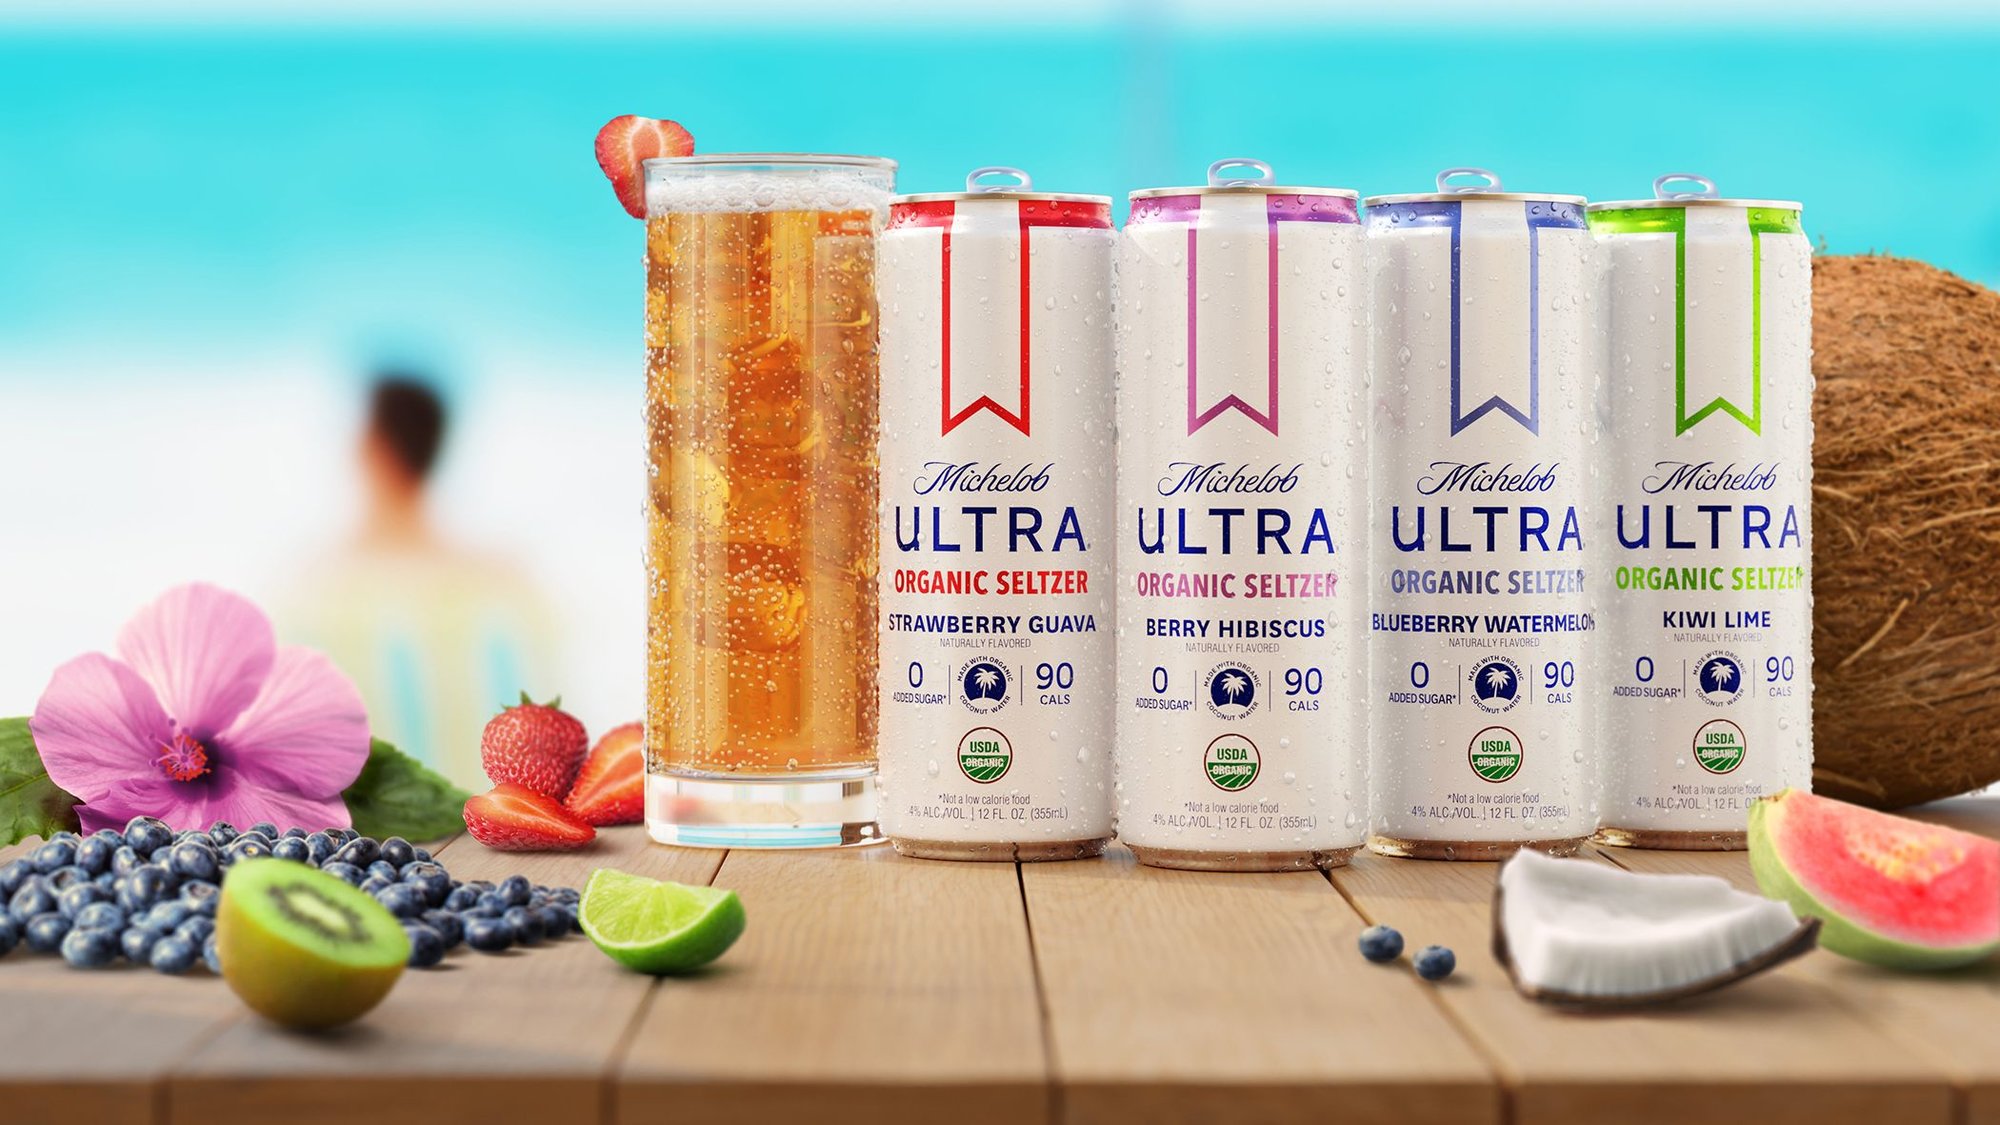 This is the main background for the Michelob Ultra Organic Seltzer Berry Hibiscus